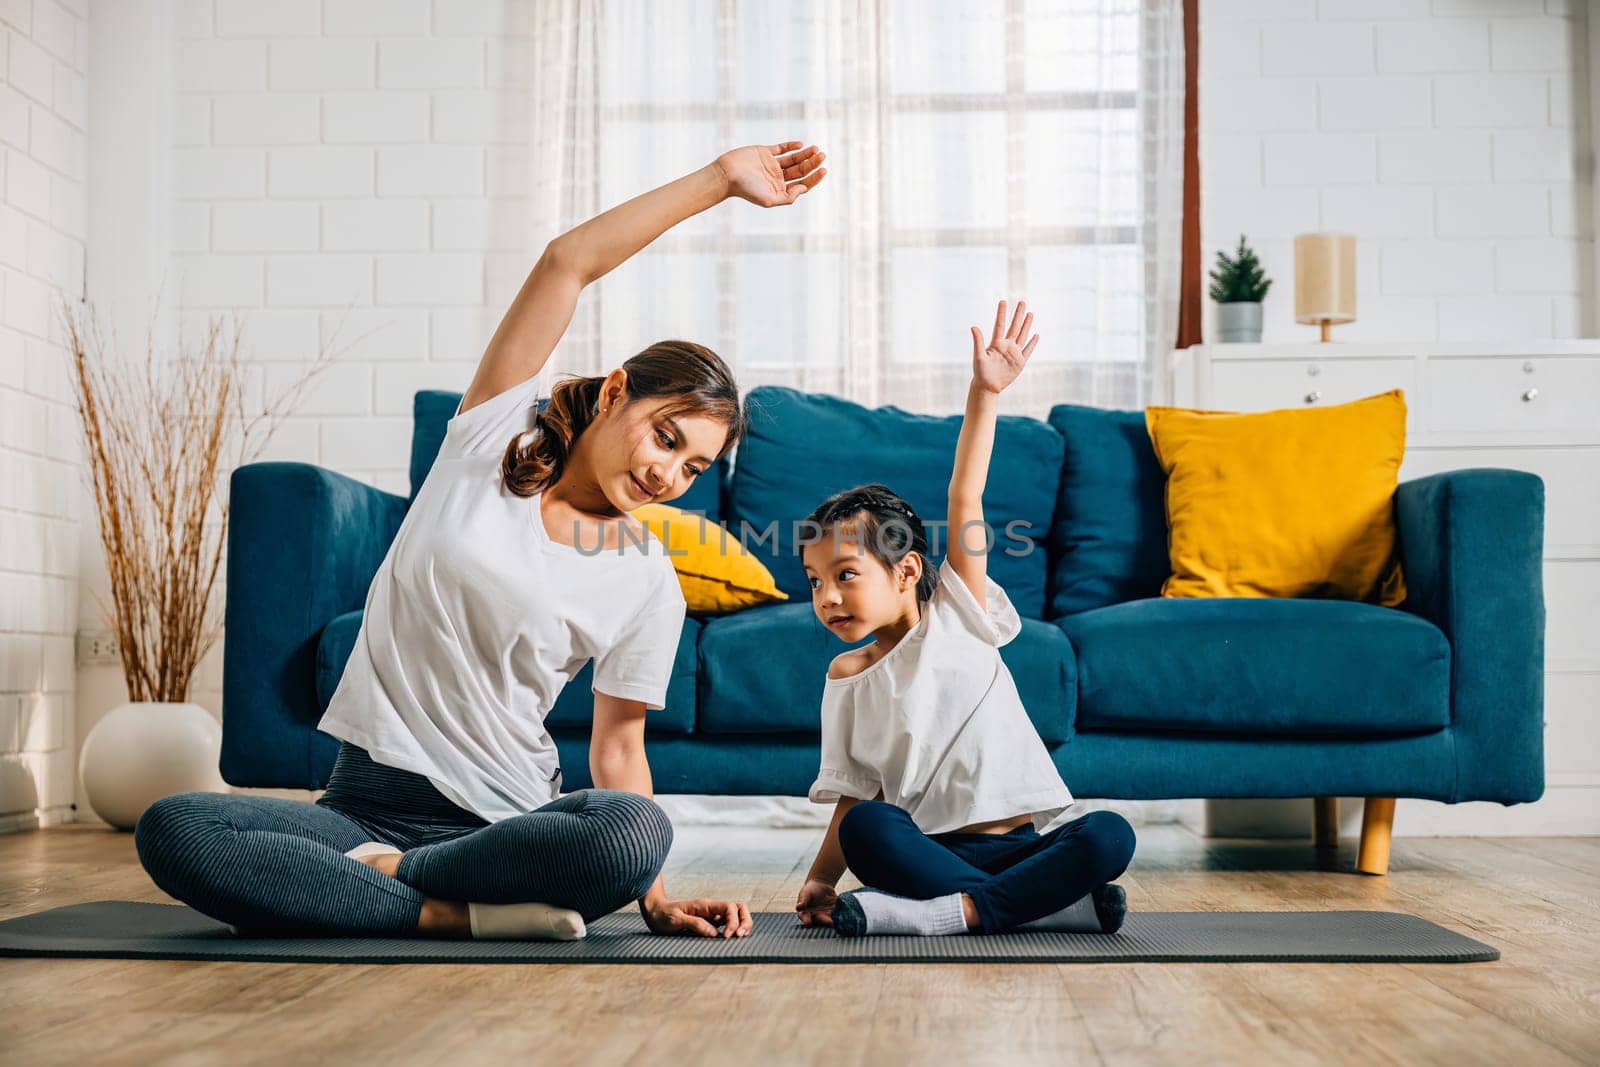 A mother and her little daughter practice yoga together focusing on relaxation and balance in the cozy living room by Sorapop